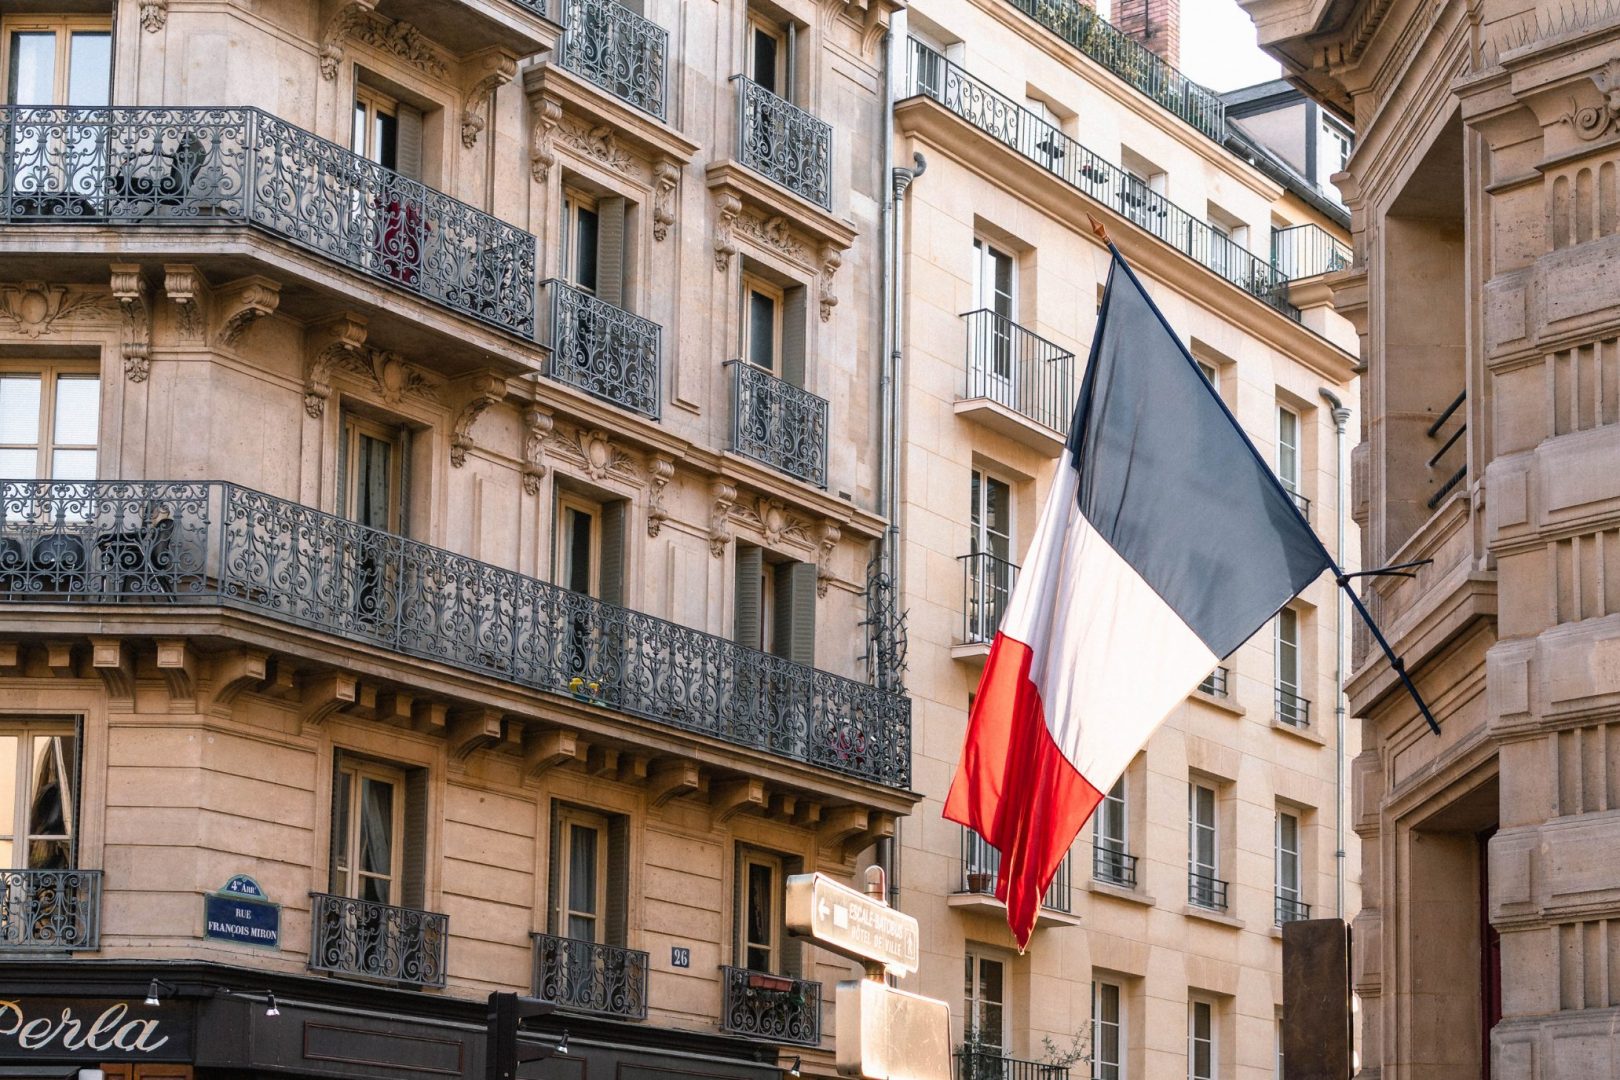 French flag hanging from a pole on a traditional Parisian building with ornate balconies and adjacent street signs.